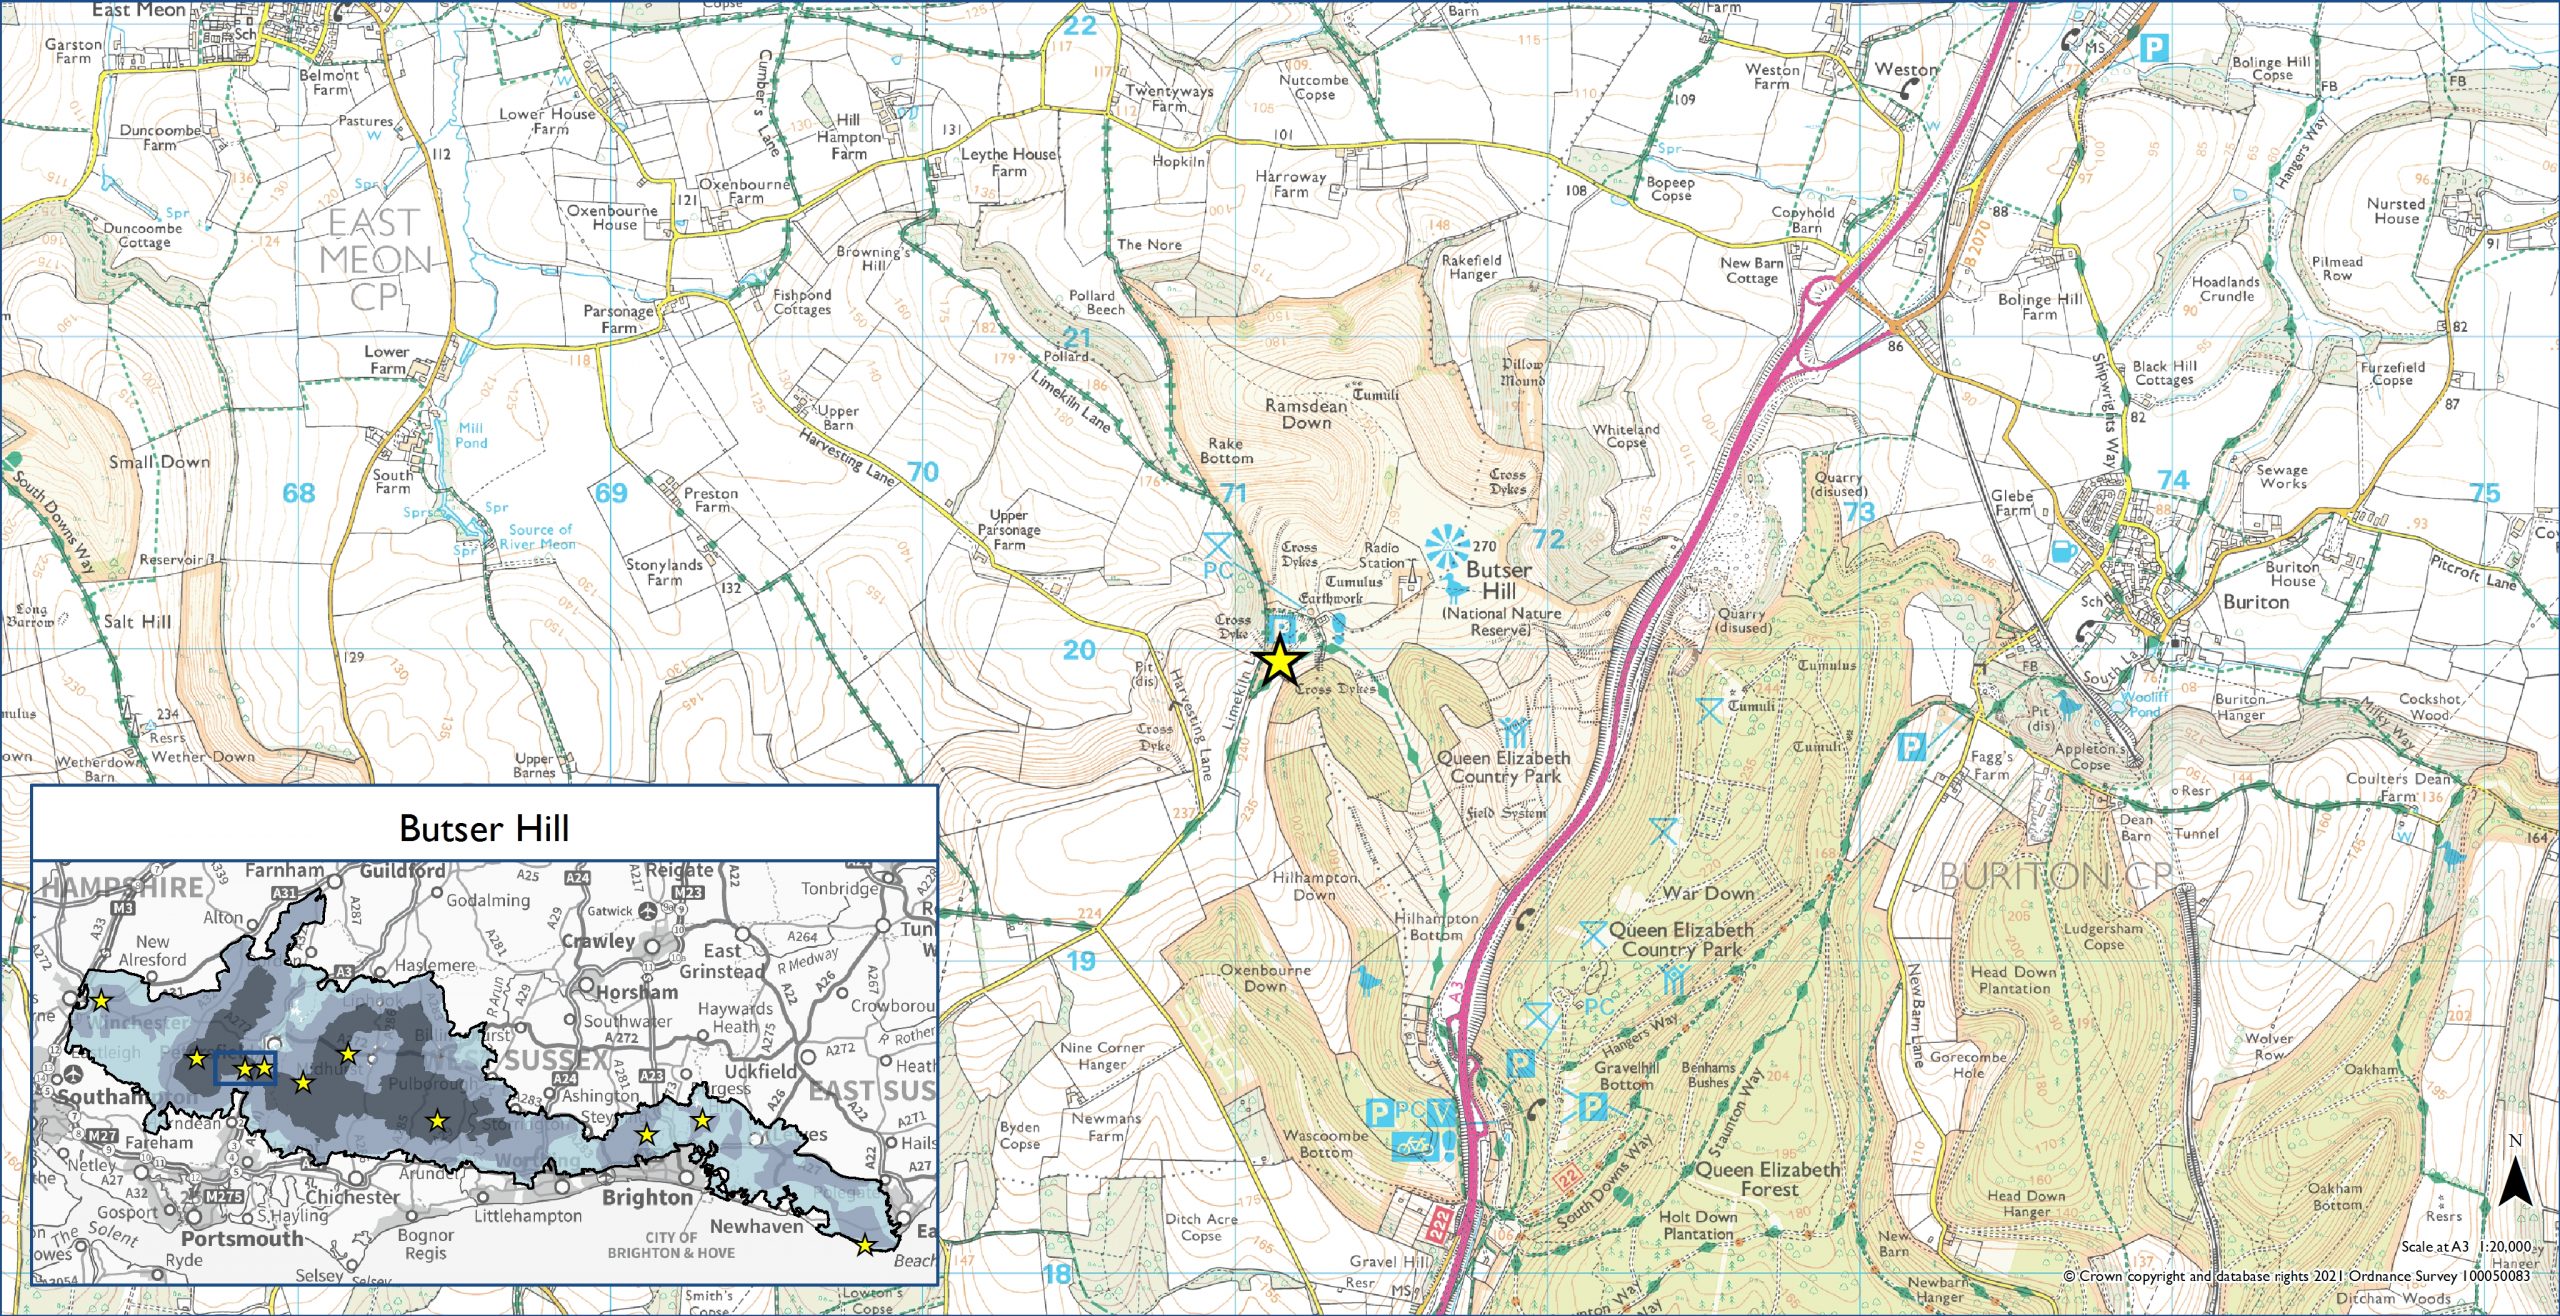 OS MAp showing the location of the Butser hill Dark Sky discovery site